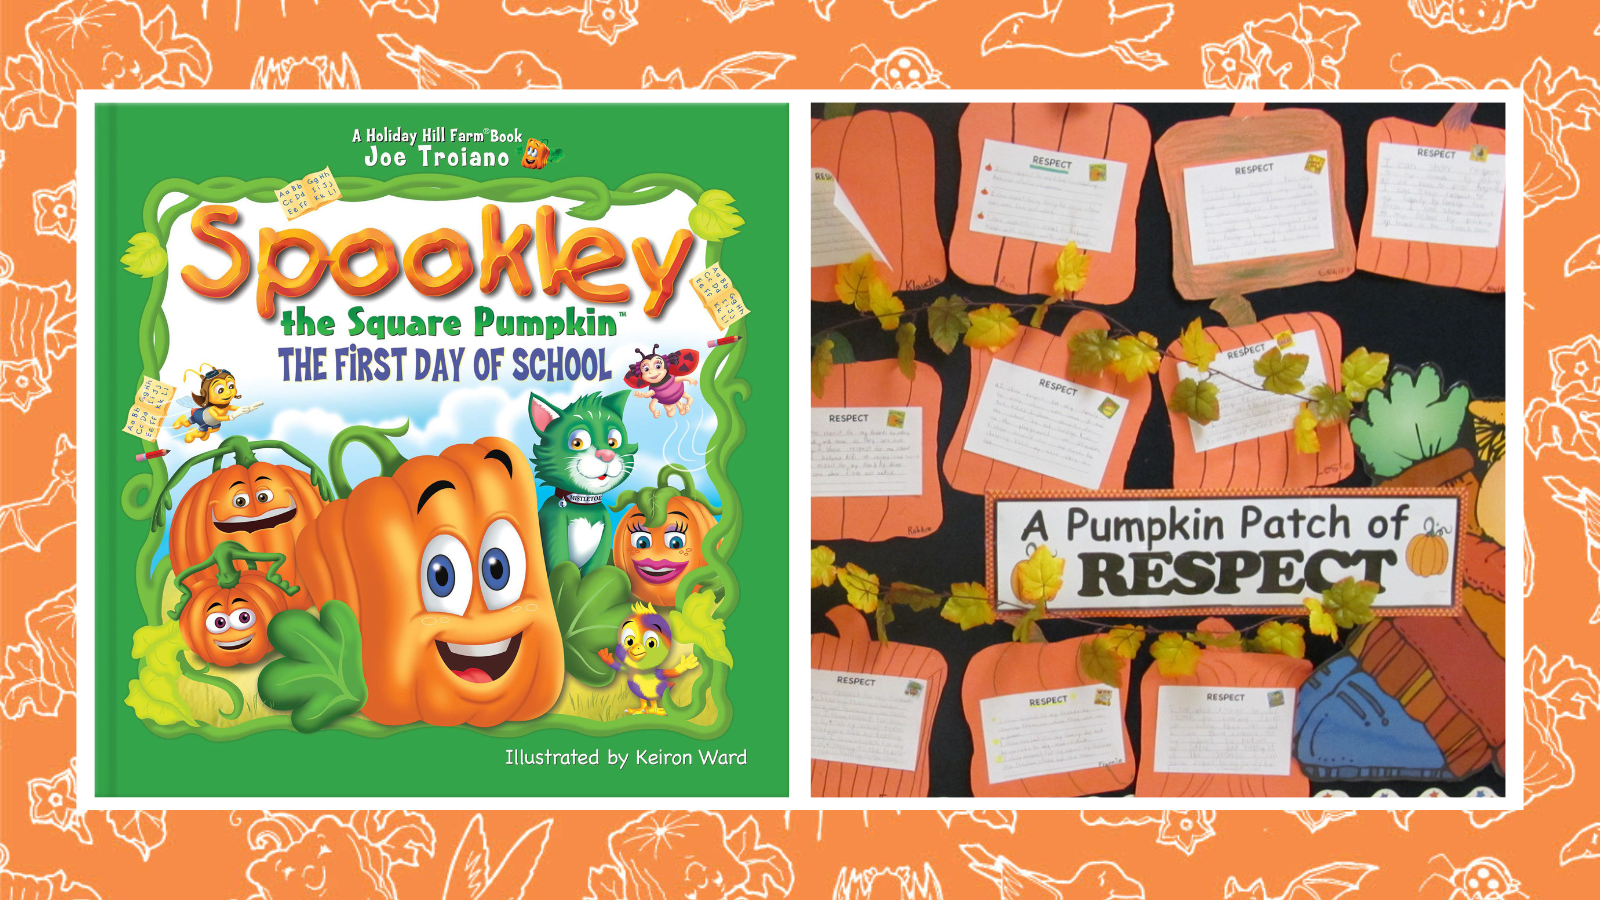 Collage of Spookley the Square Pumpkin book and pumpkin patch of respect bulletin board